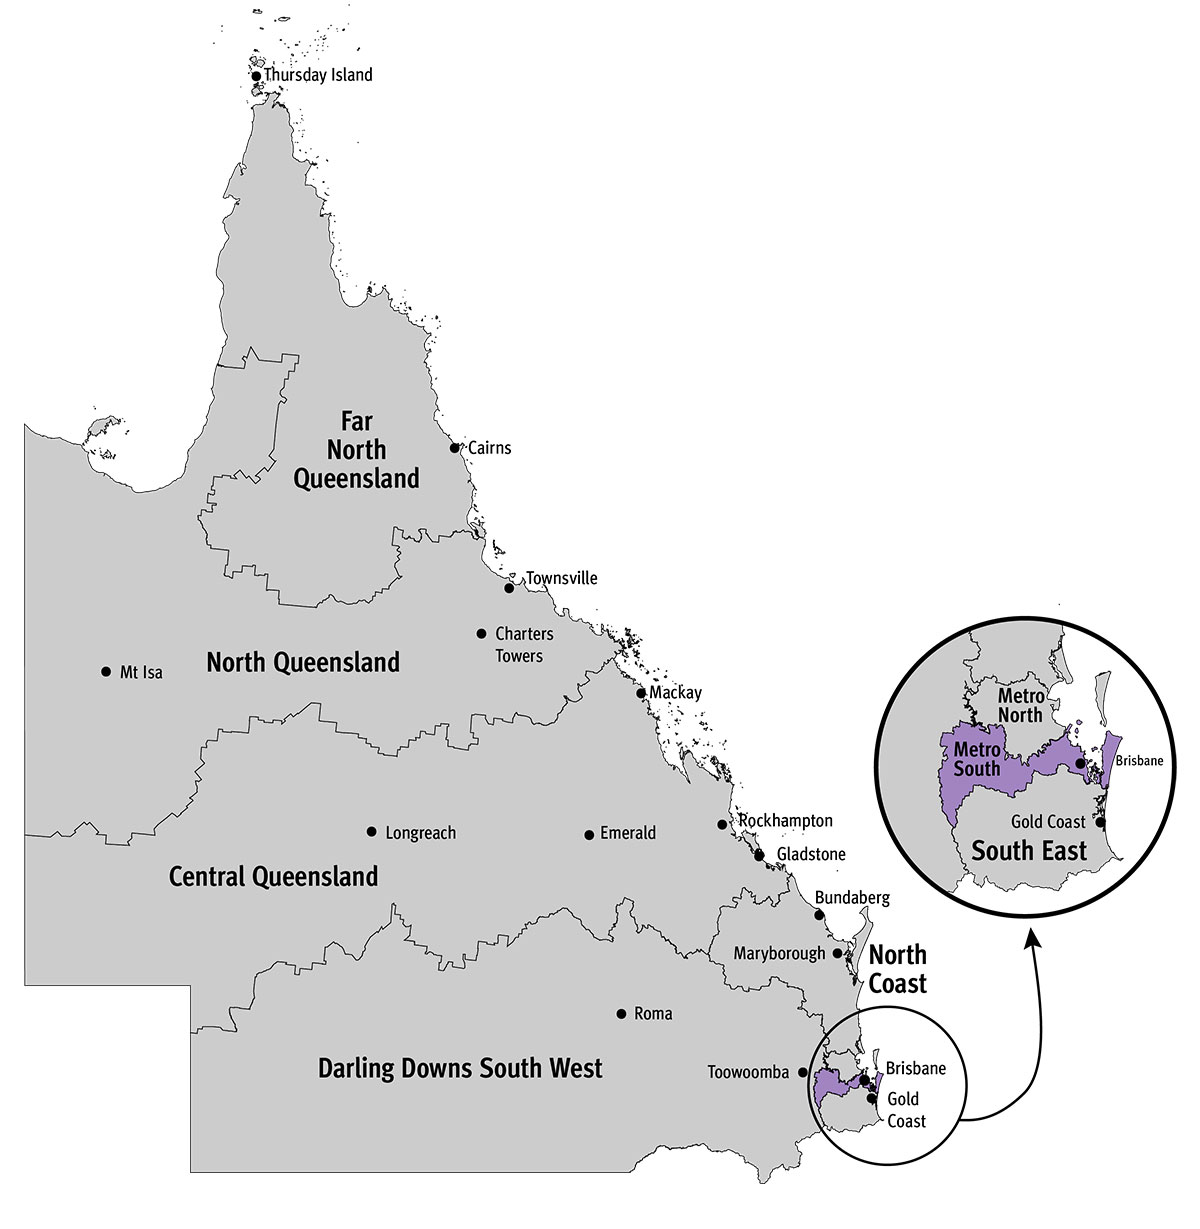 Queensland map with Metro South region highlighted. Brisbane is included in this region.